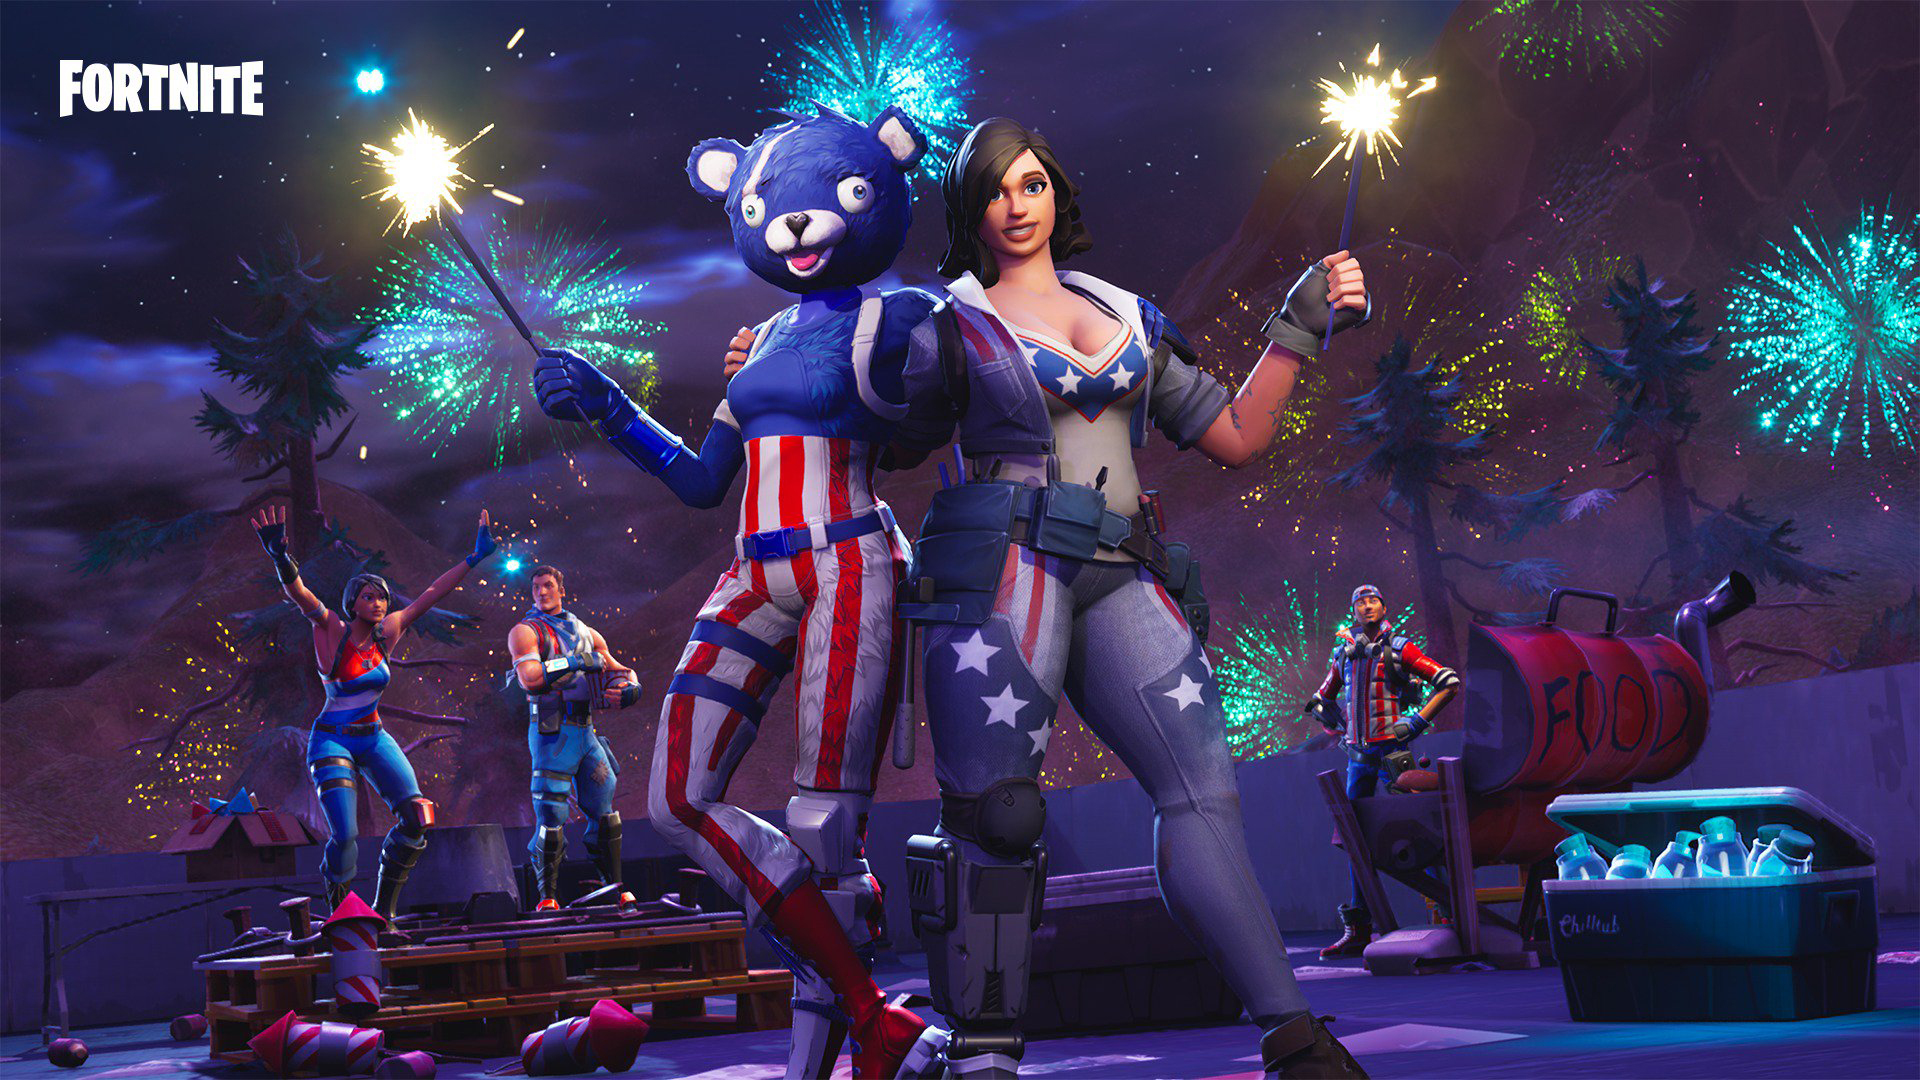 Fortnite Game Background 4th July Wallpaper And Stock